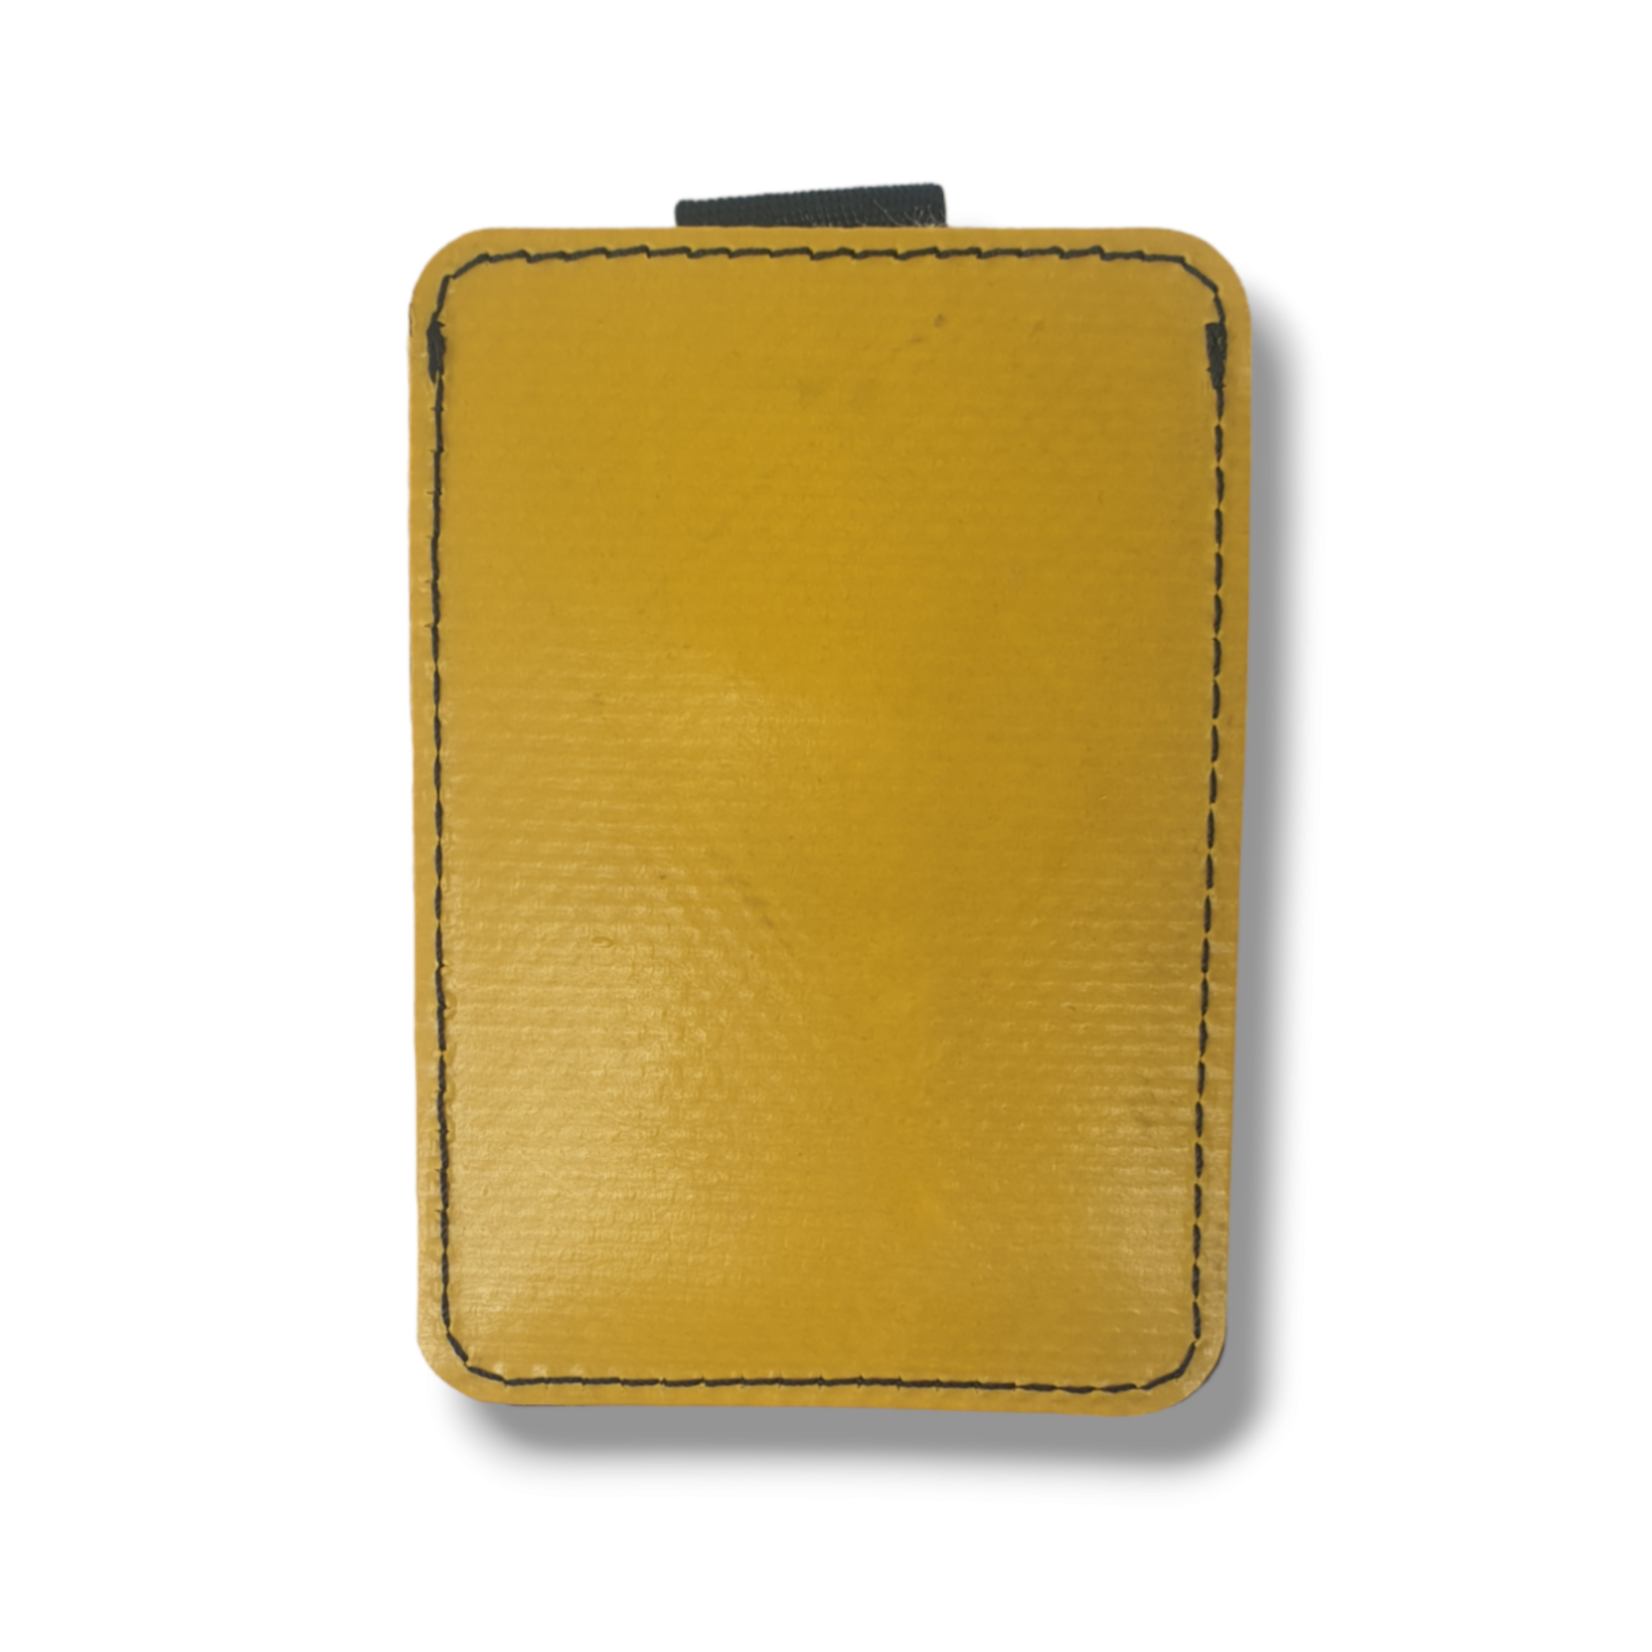 FREITAG F380 JUSTIN card holder for phone case